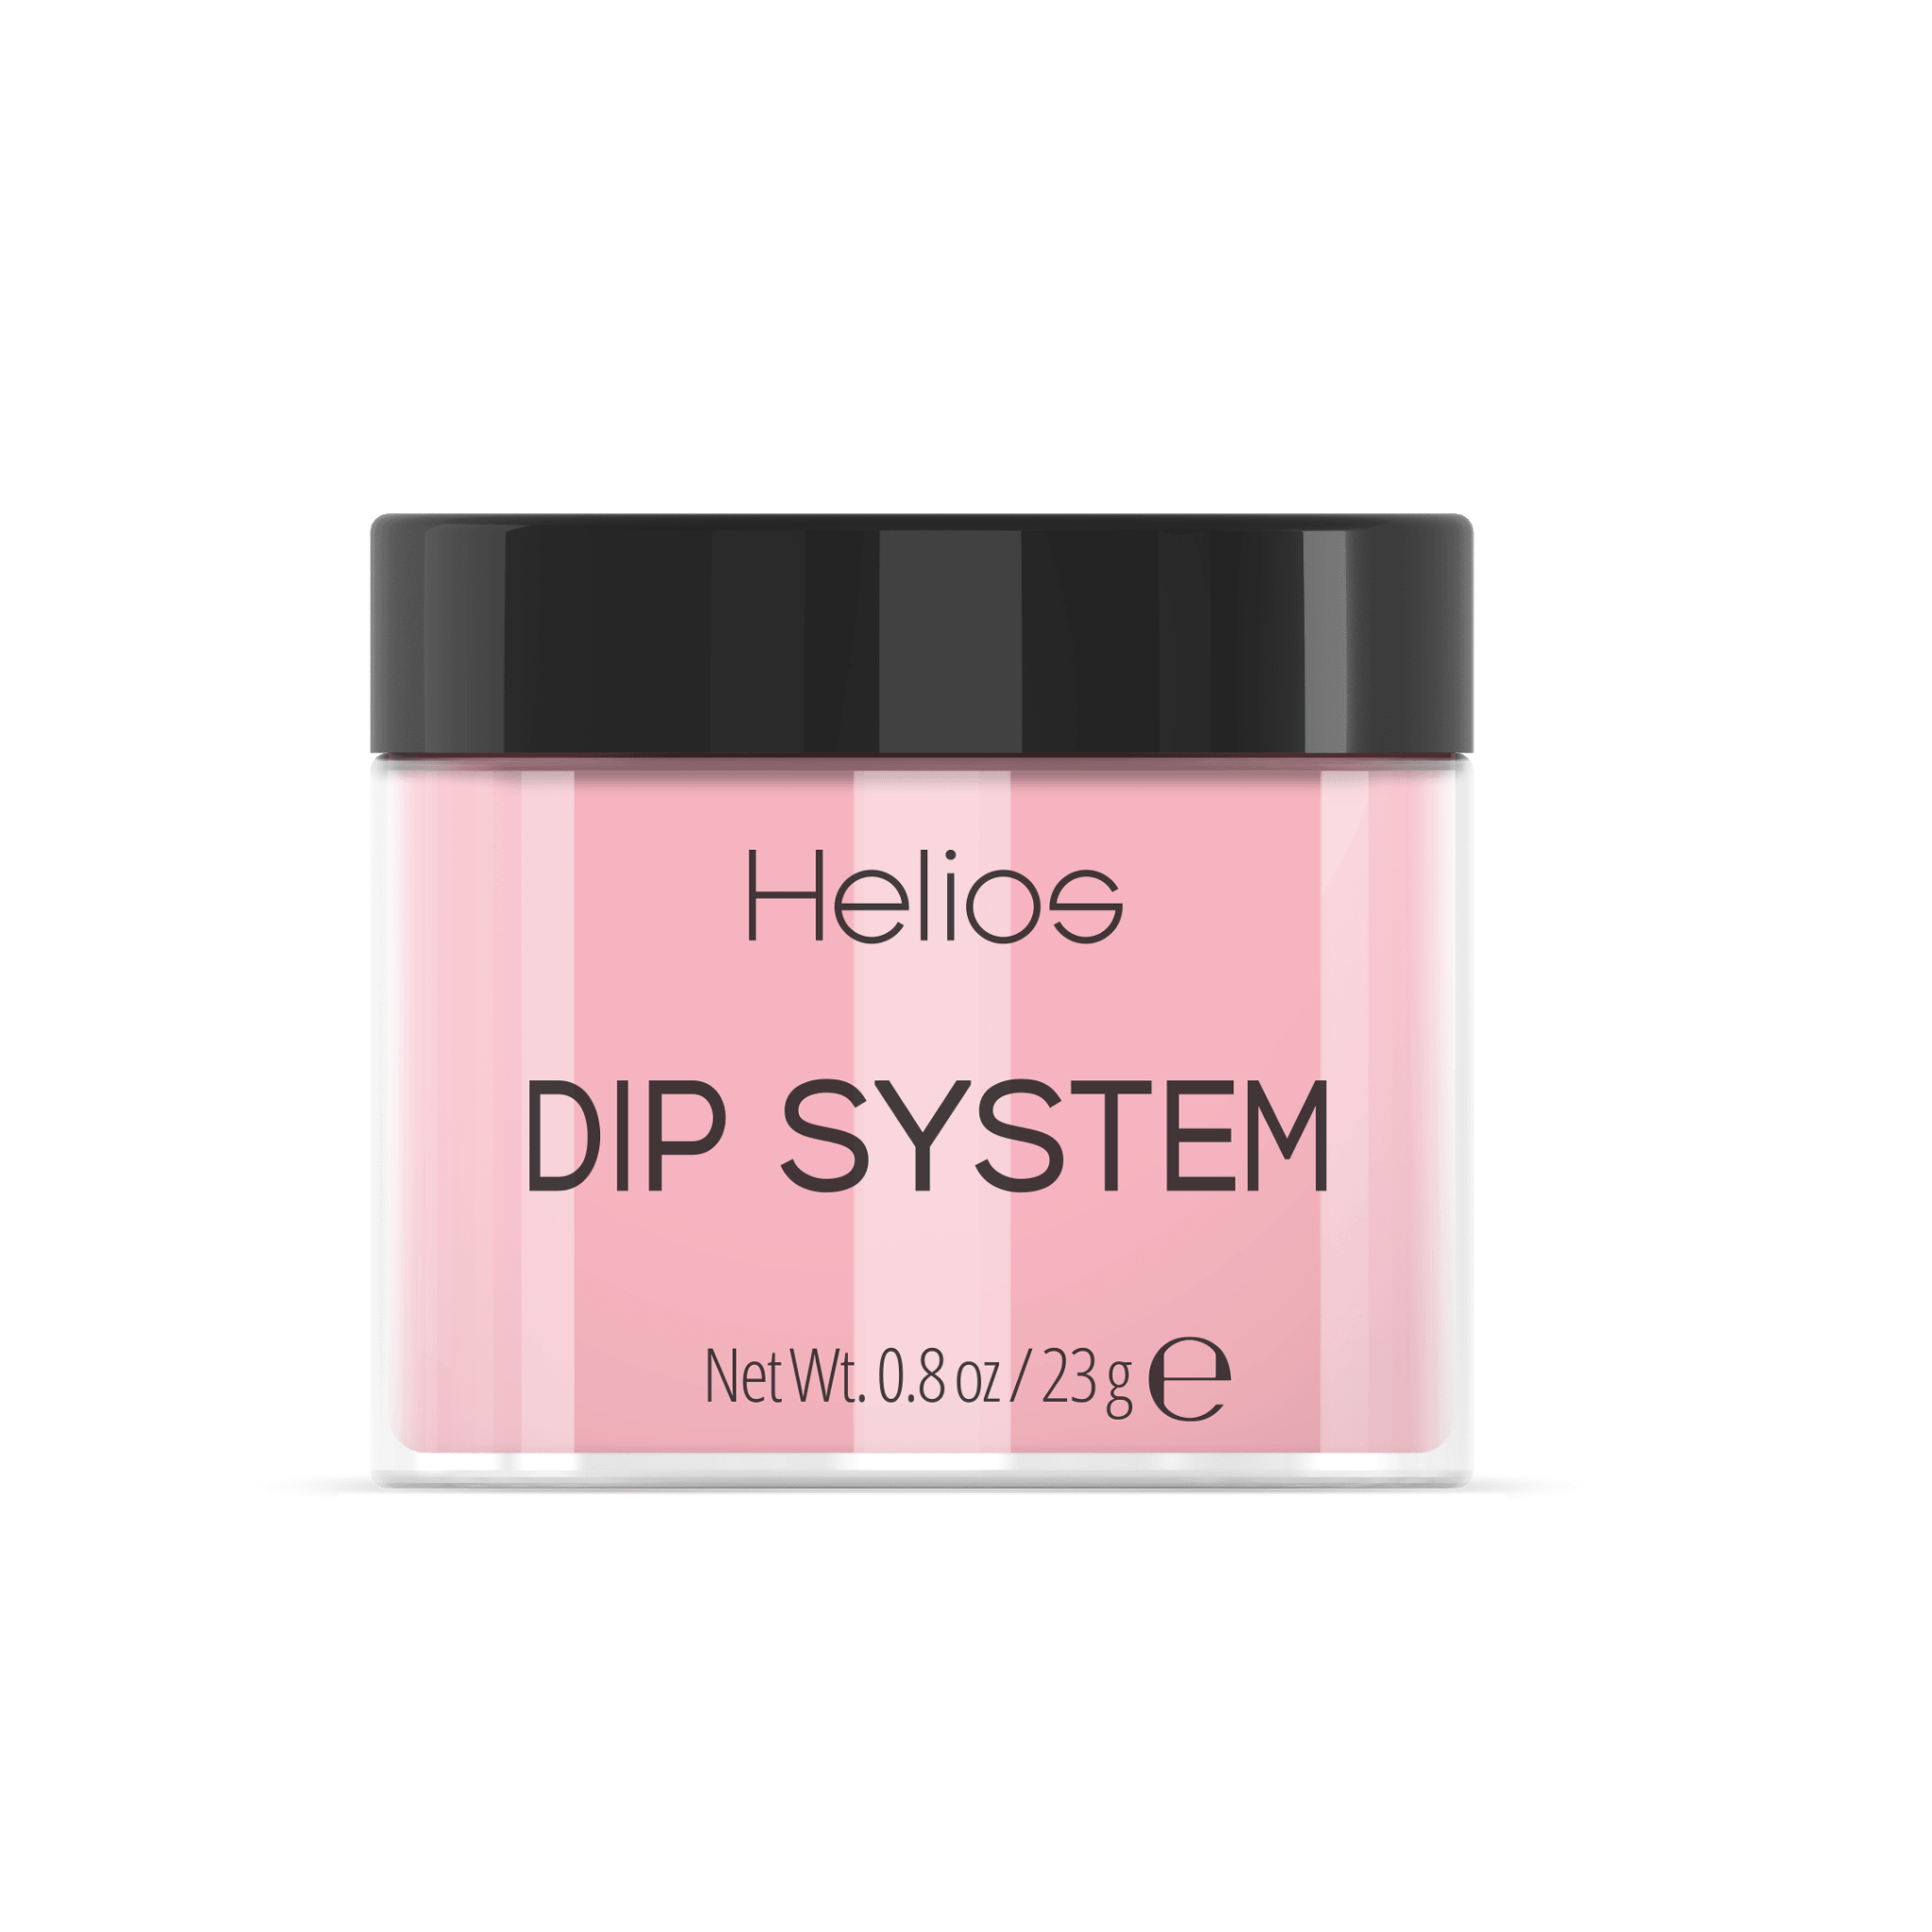 DIP SYSTEM - IT'S A GIRL - Helios Nail Systems